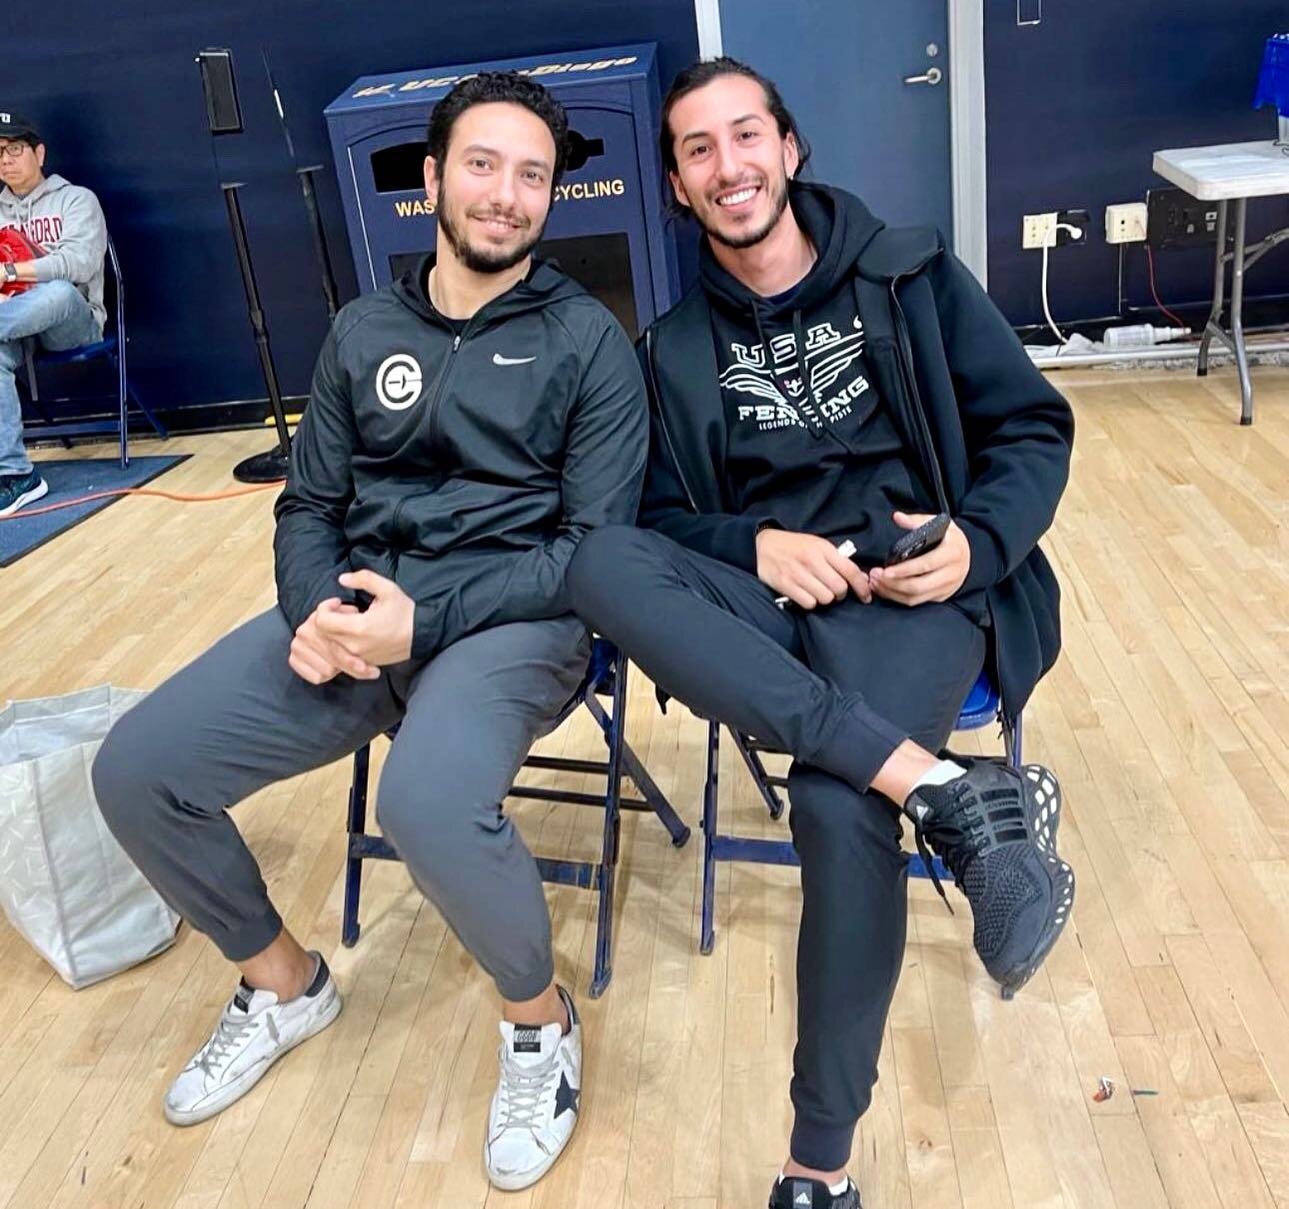 Whether it&rsquo;s on the floor training or coaching you from the sidelines, our EFC coaches are with you for every milestone🔥

Coach @tarek.f.ayad and Coach @jedifico pour their heart and soul into their fencing students and we&rsquo;re grateful fo